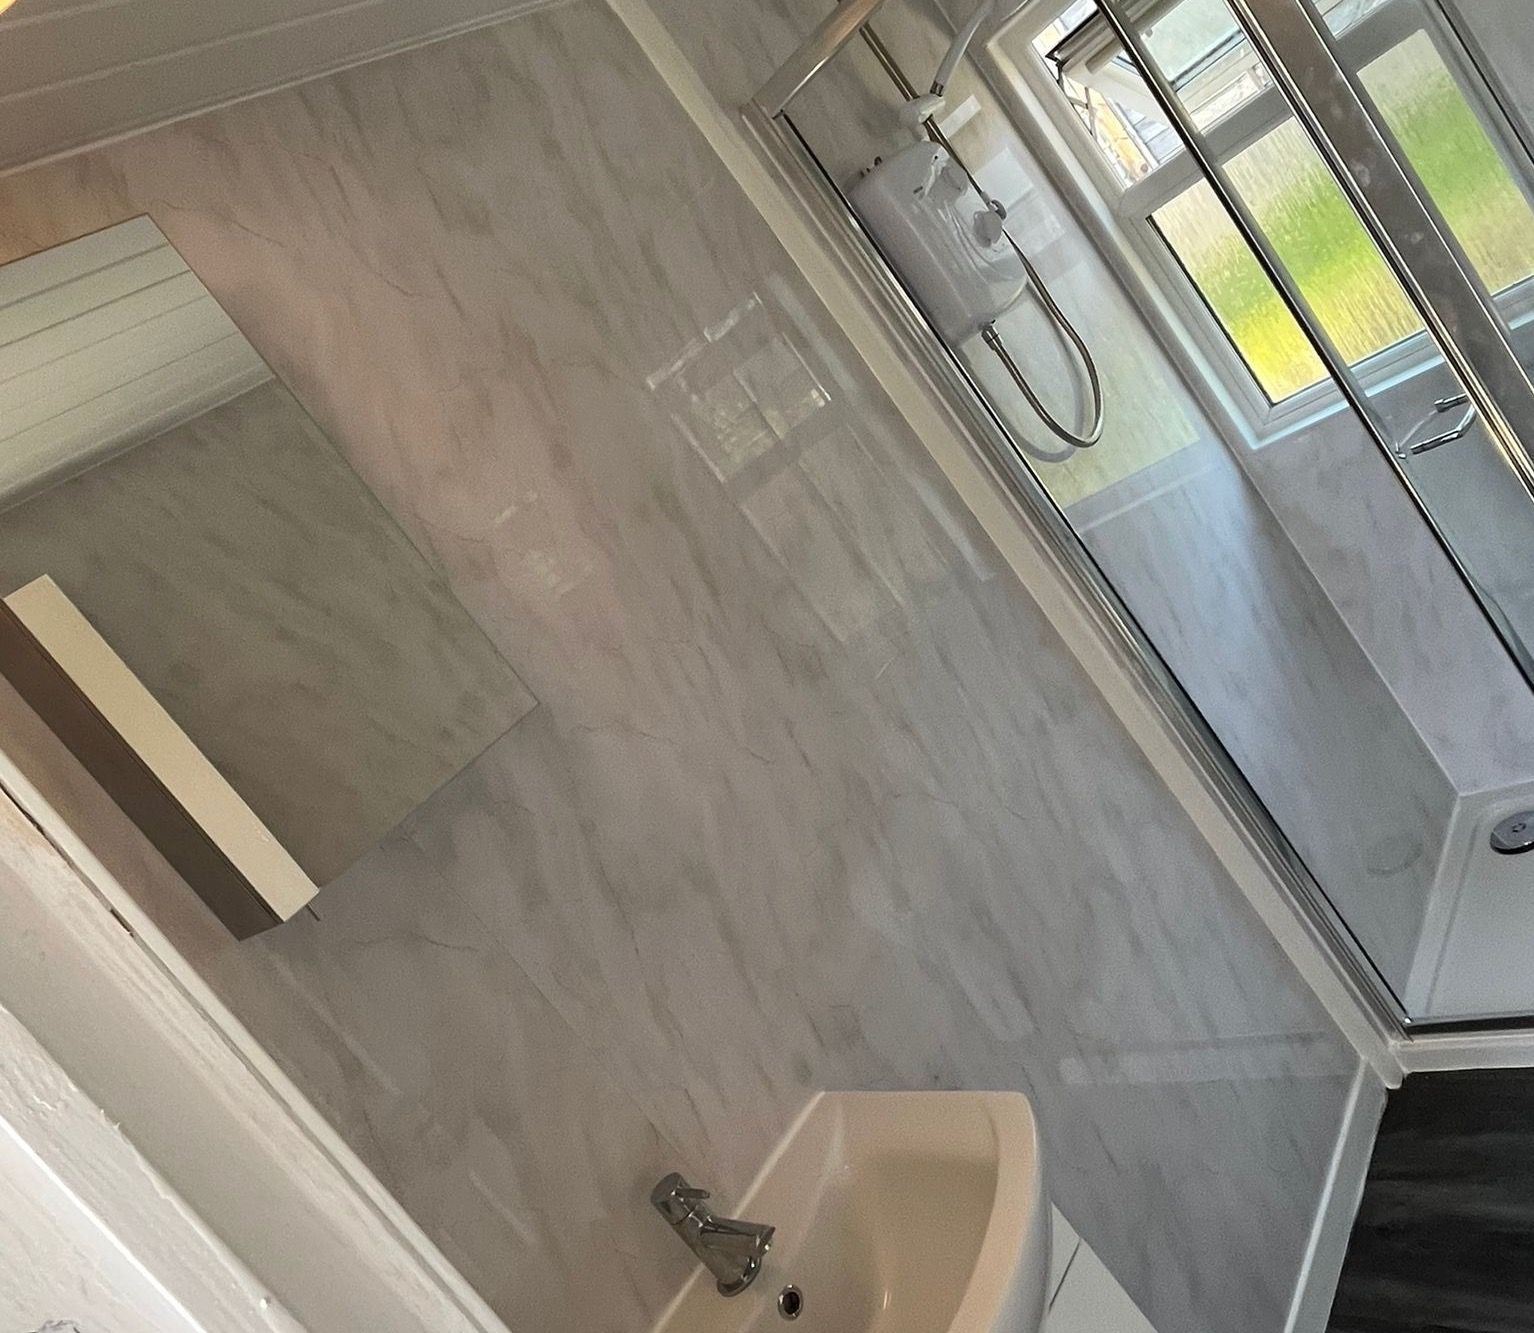 Viking Park Homes Limited install quality park home bathrooms across the UK